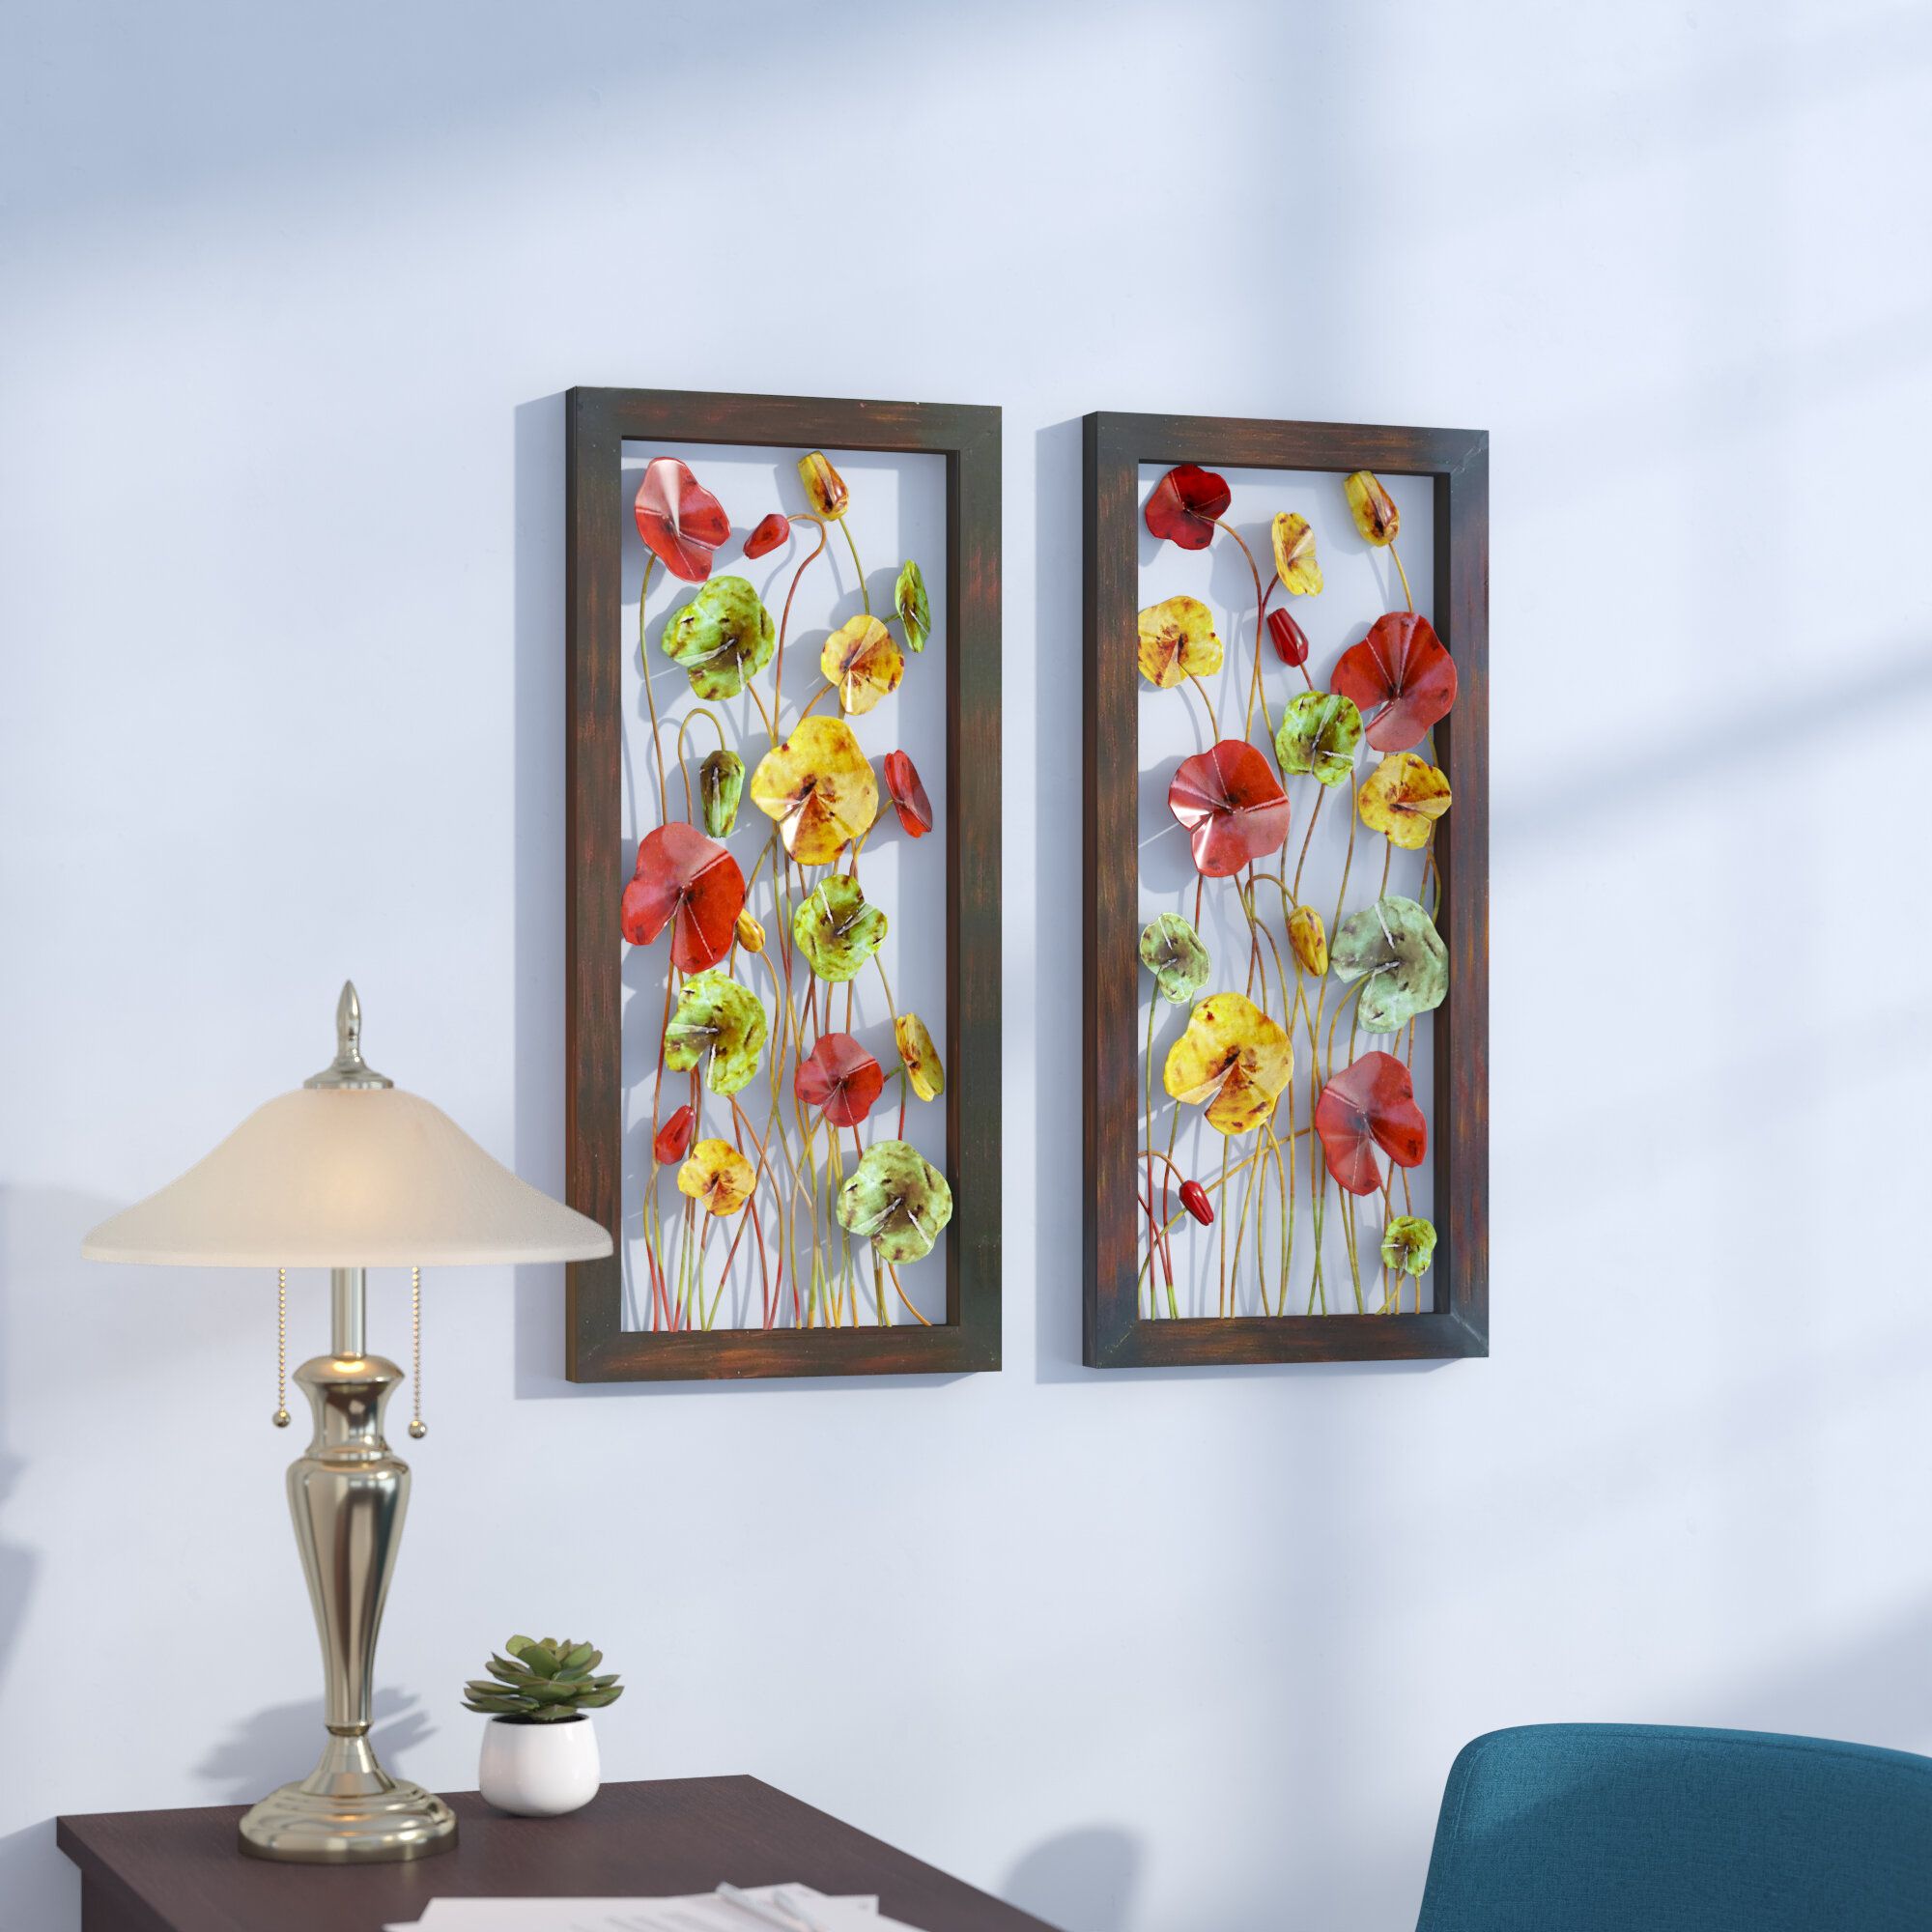 Mirror Wall Decor Set | Wayfair Throughout 2 Piece Panel Wood Wall Decor Sets (set Of 2) (View 4 of 30)